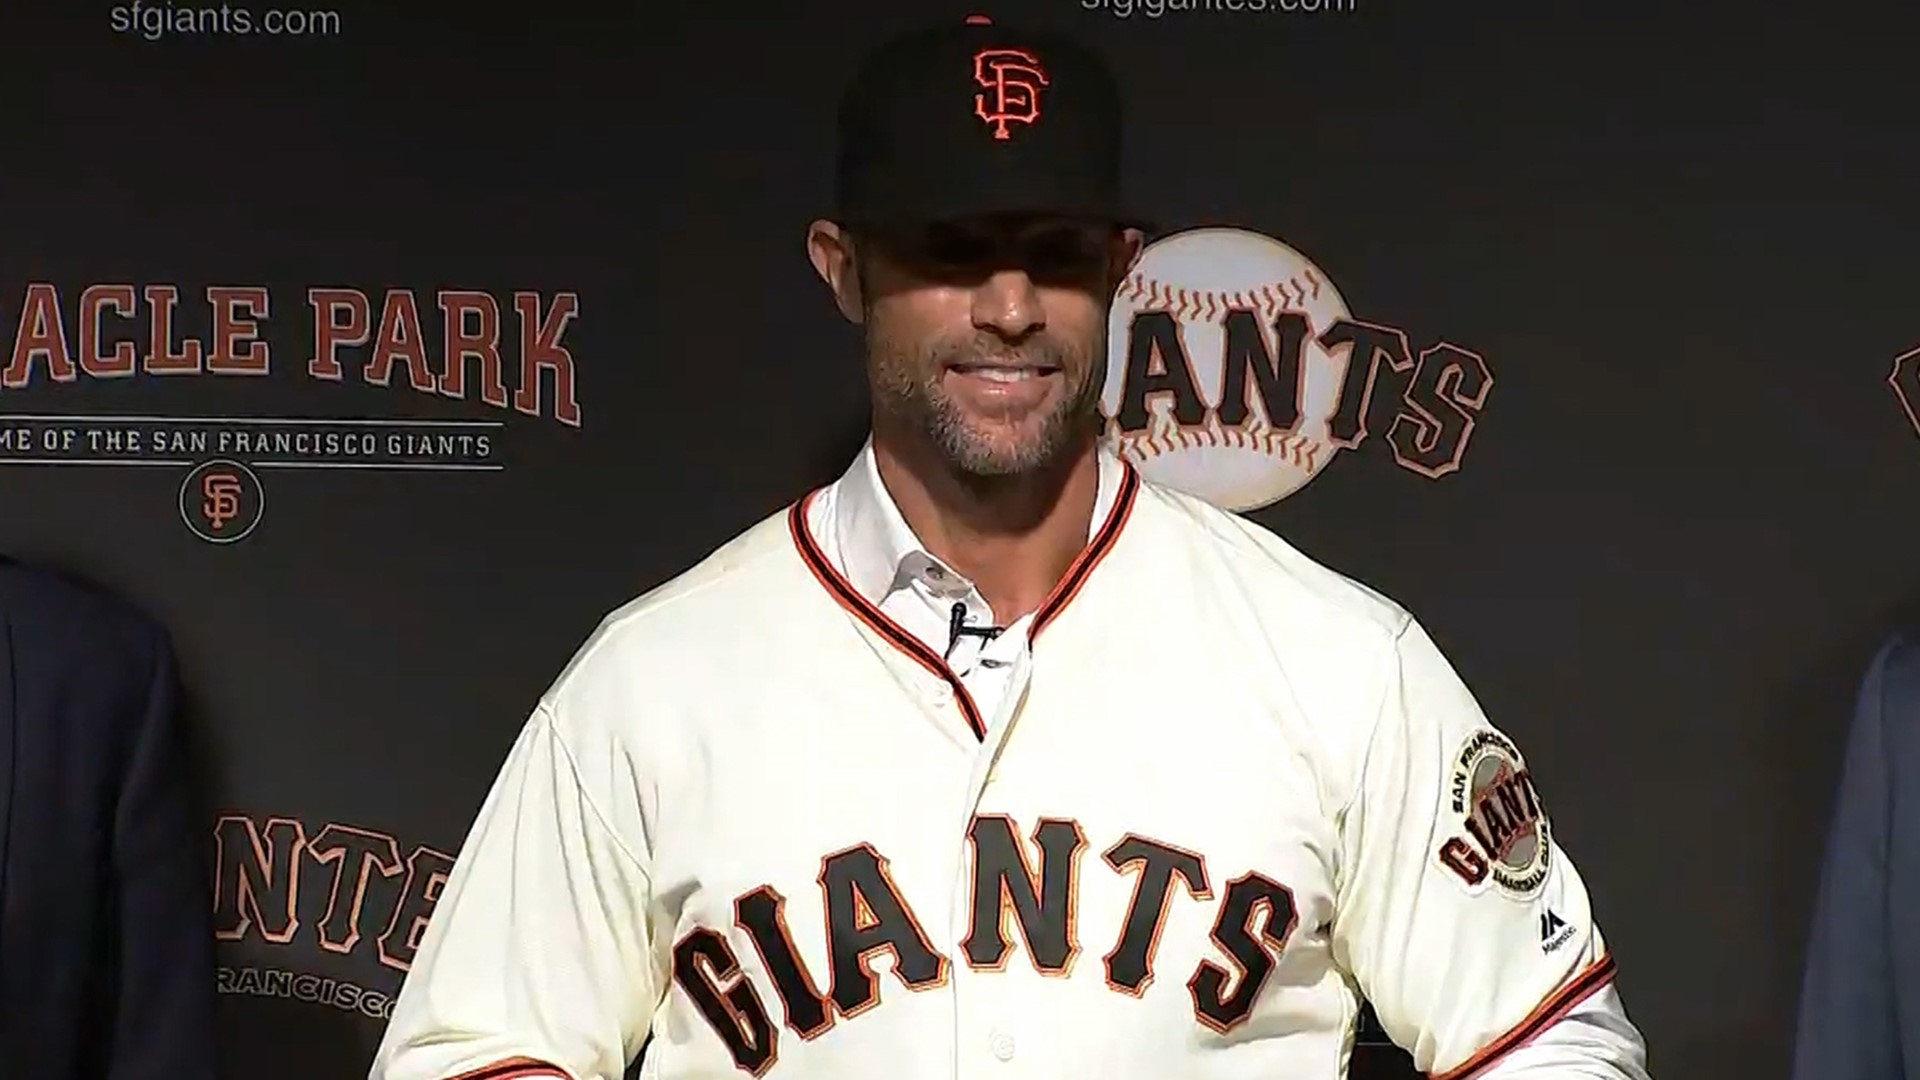 Gabe Kapler laid out his plans as the new manager of the San Francisco Giants during an introductory press conference.